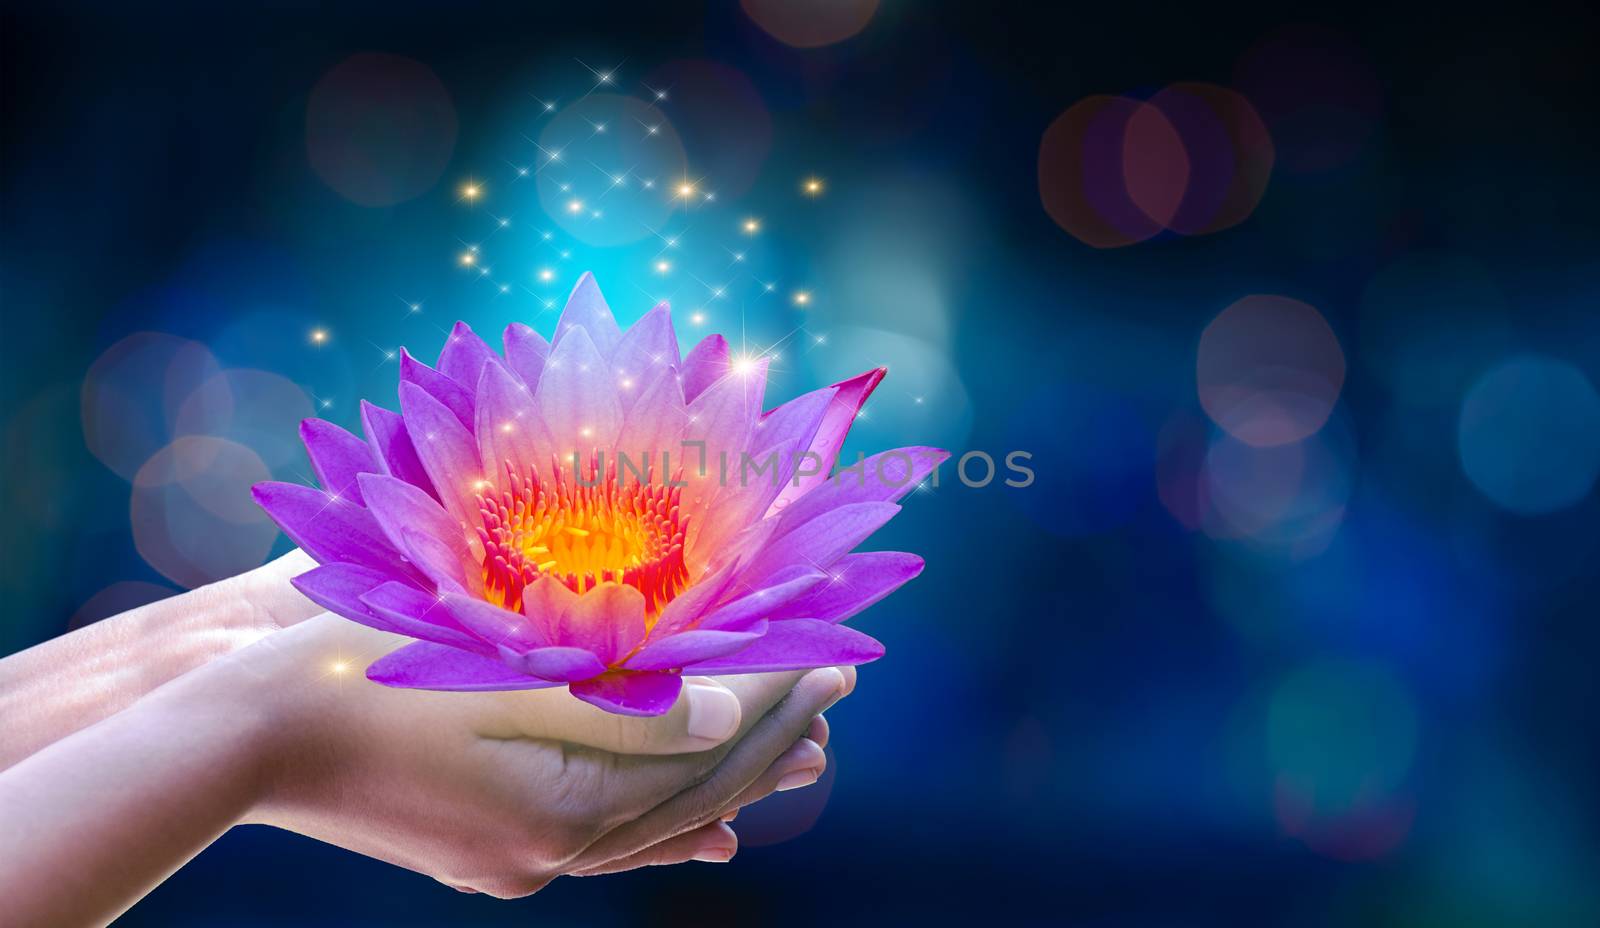 In the hands of a flower lotus Pink light purple floating light sparkle purple background by sarayut_thaneerat